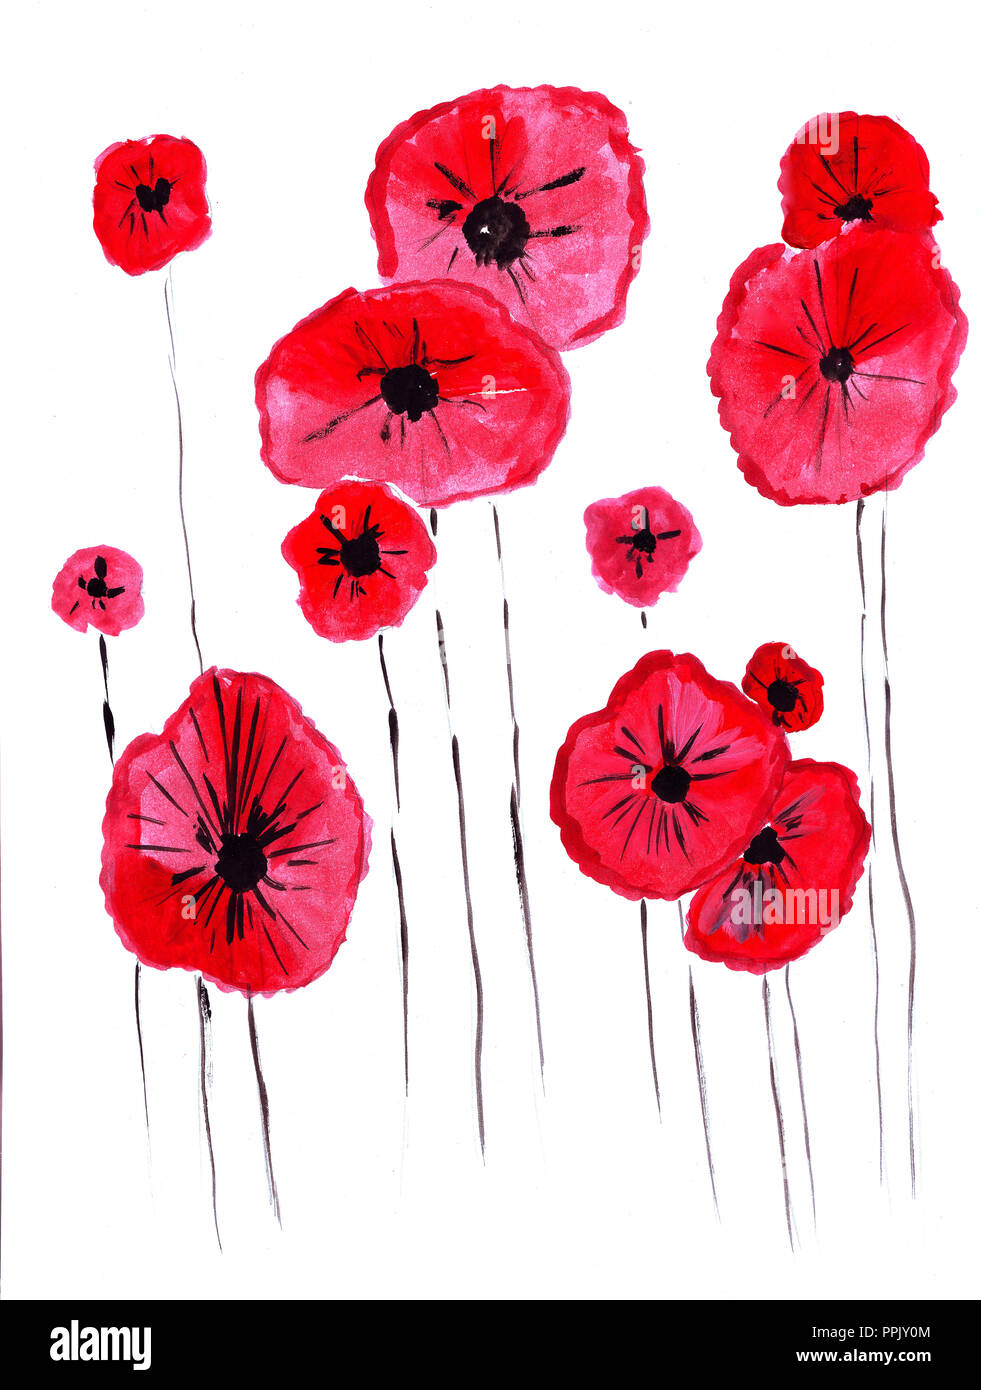 Poppy illustration Cut Out Stock Images & Pictures - Alamy